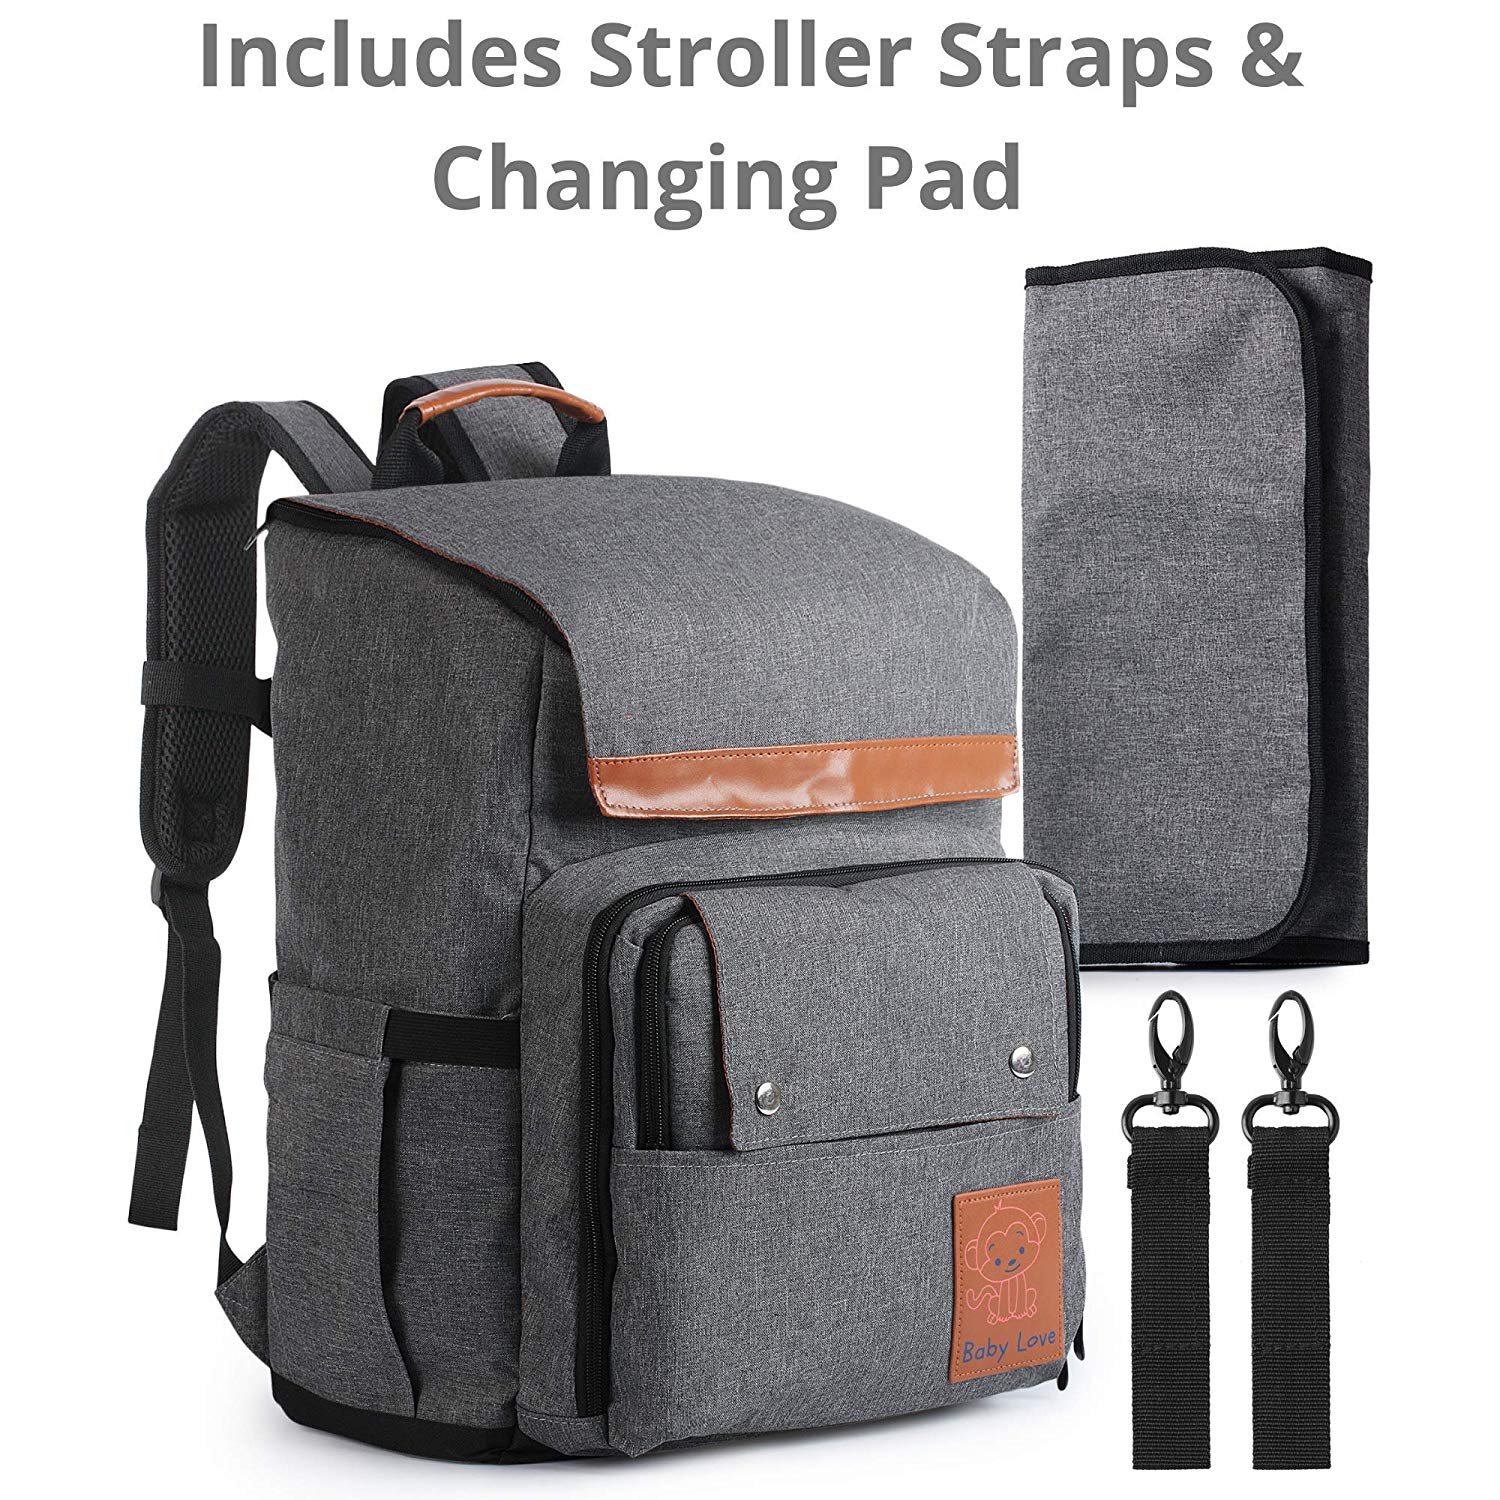 For Moms with Twins or Multiple Little Ones - Spacious Baby Travel Bag Includes Stroller Straps (3)